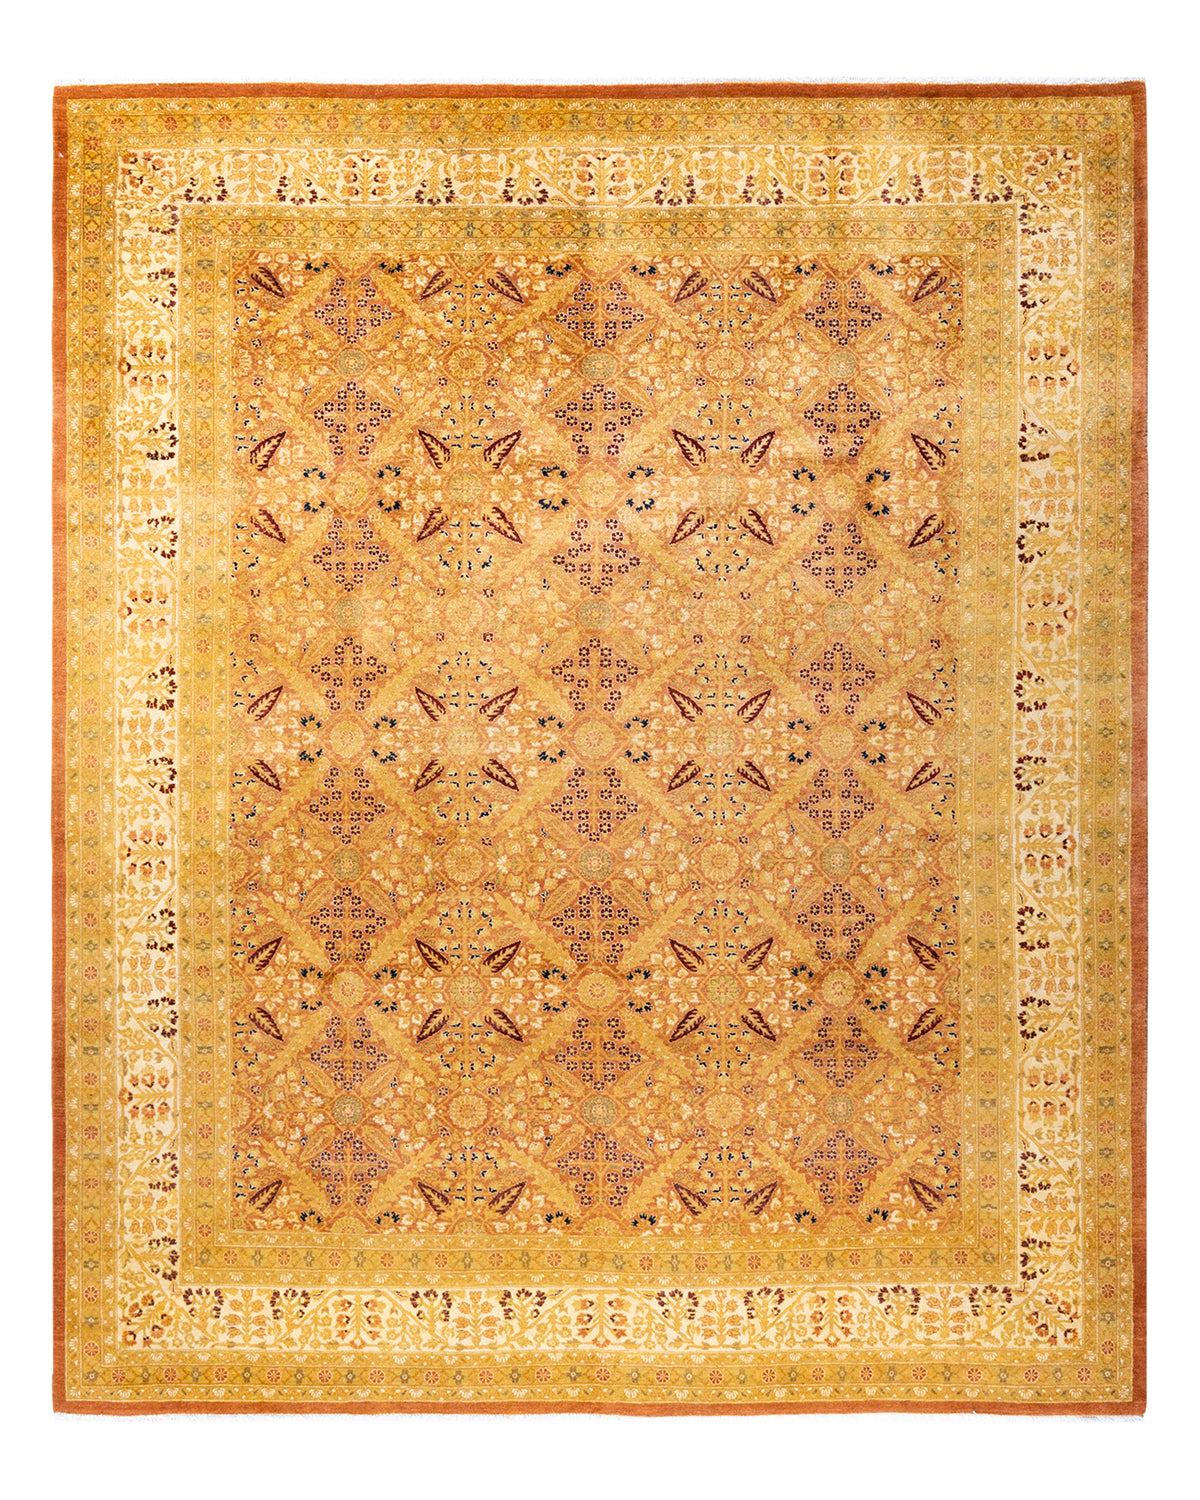 Mogul, One-of-a-Kind Hand-Knotted Area Rug  - Brown, 8' 3" x 9' 10"